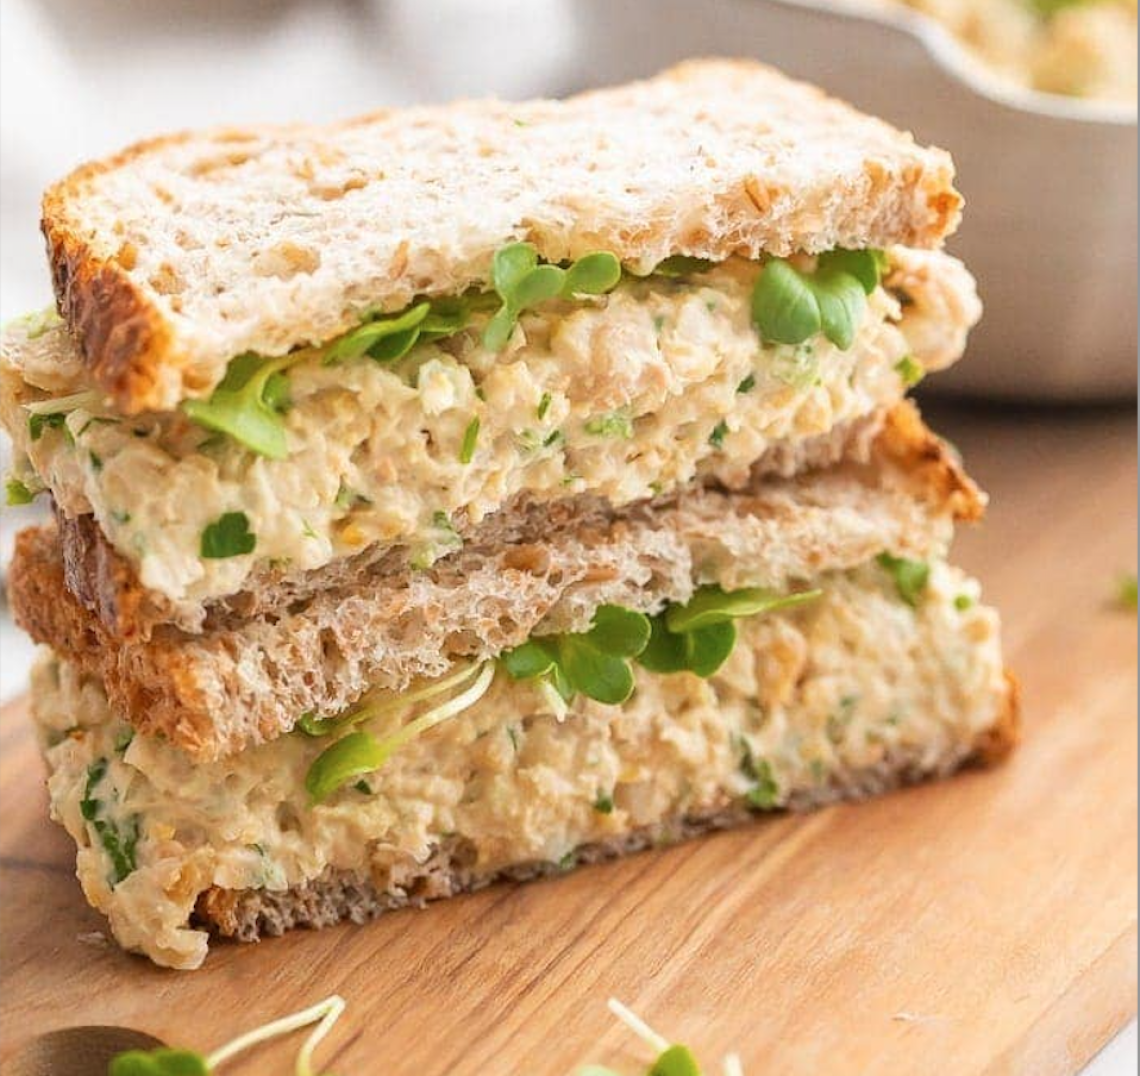 Mashed Chickpea Salad and Sprouts on Whole Grain Toast 